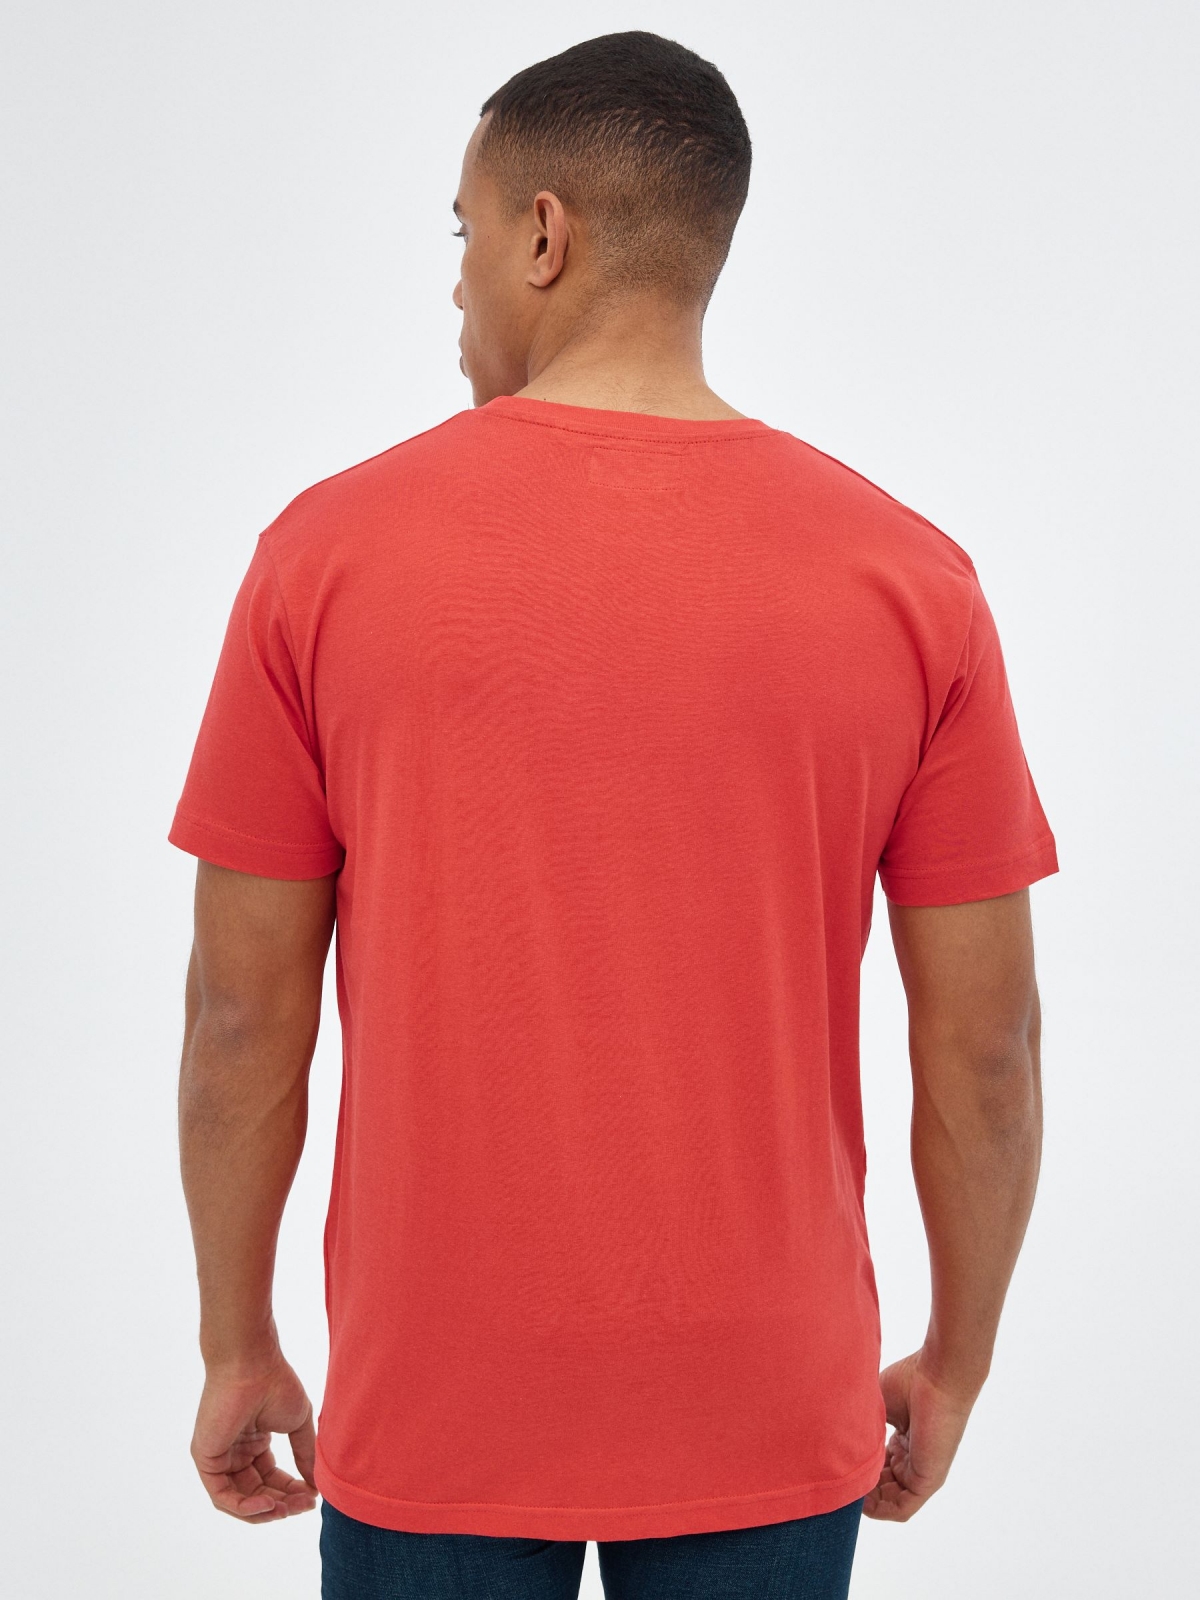 Japanese style black T-shirt red middle back view